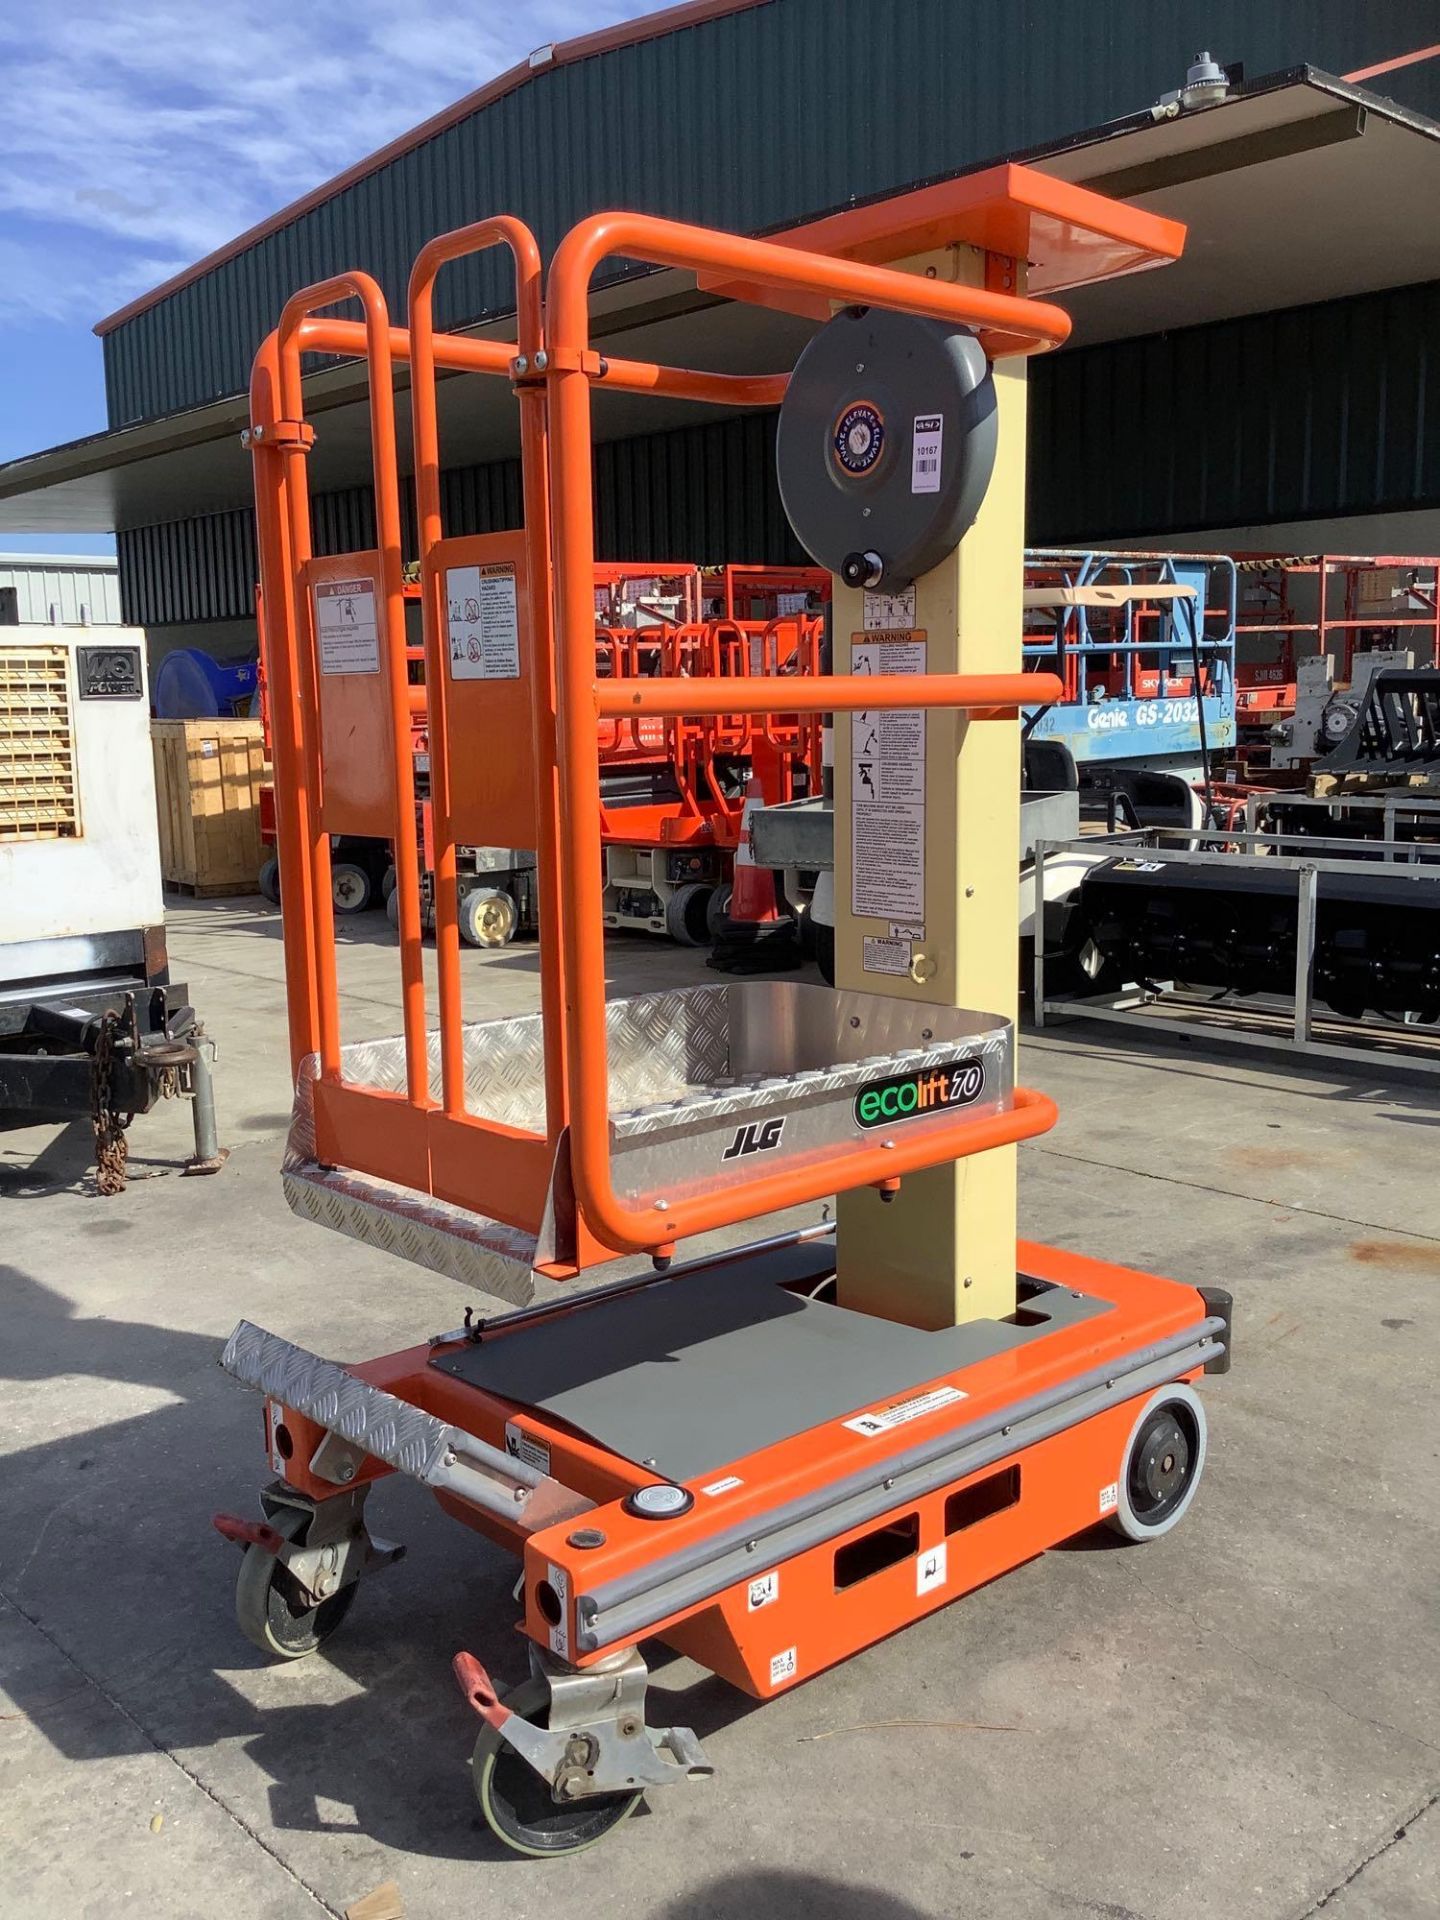 2018 JLG ECOLIFT 70,MANUAL, APPROX MAX PLATFORM HEIGHT 7FT, NON MARKING TIRES - Image 2 of 10